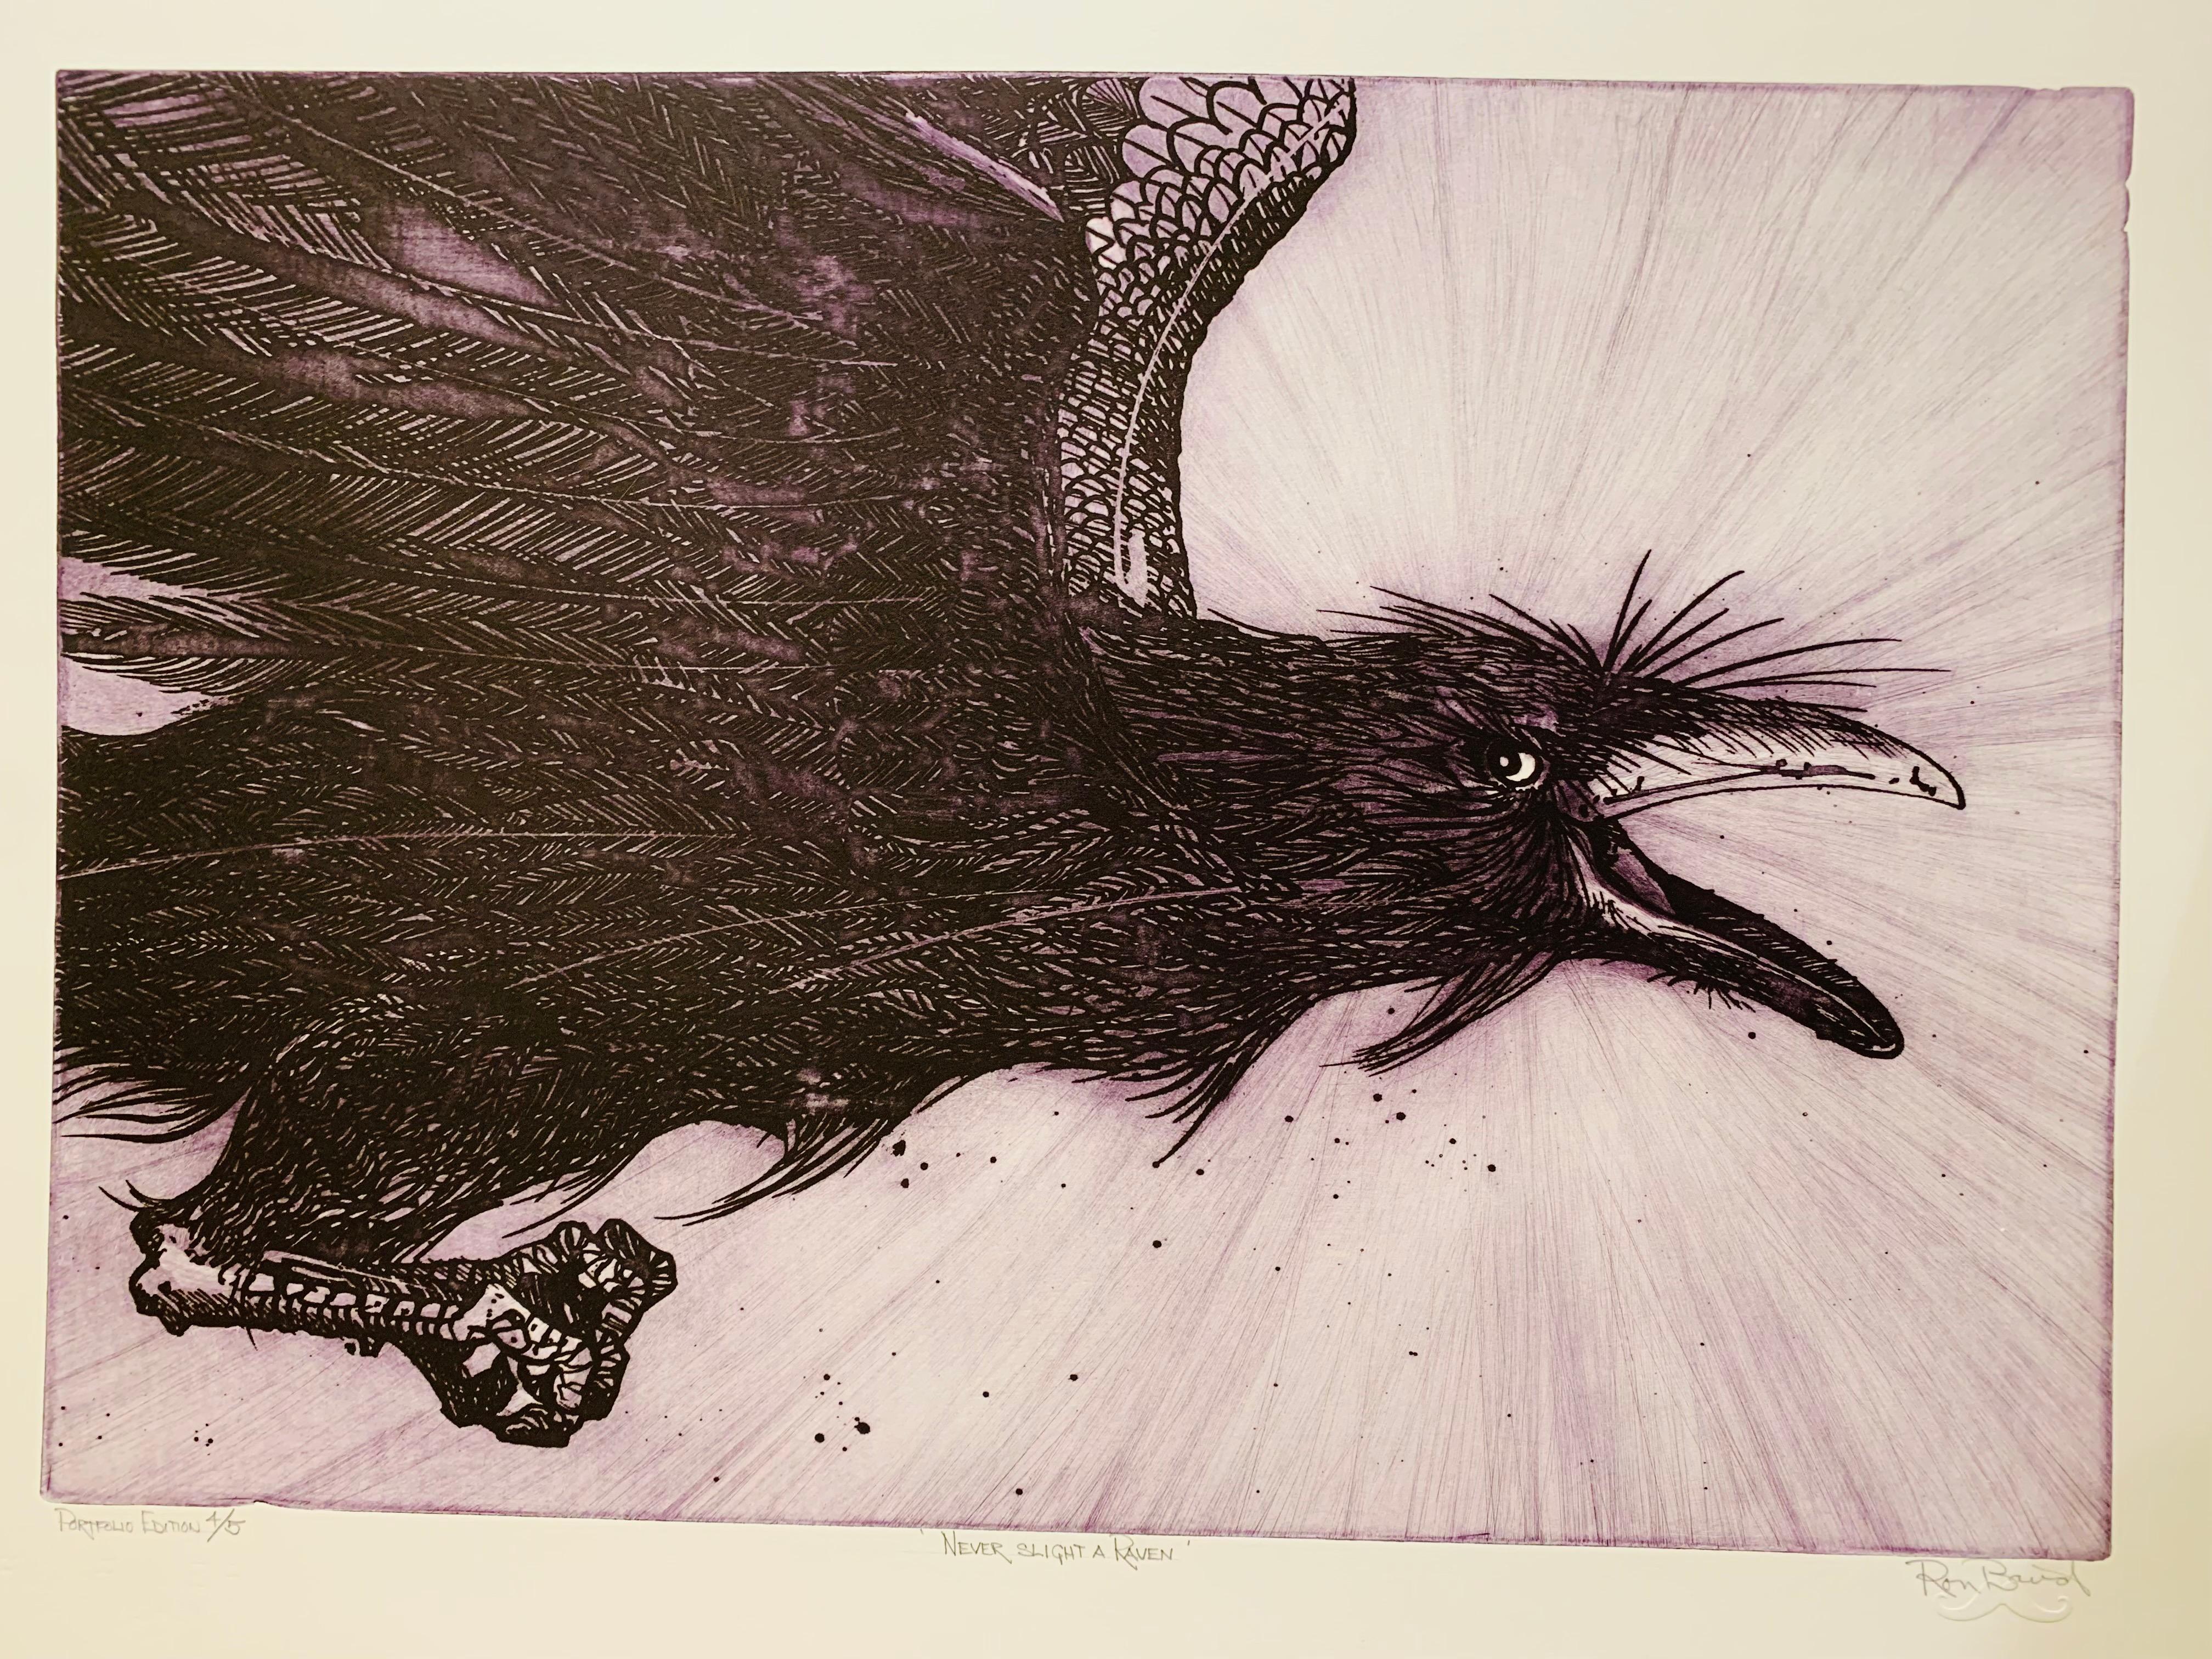 Ronald Baird, Canadian, b.1940
PORTFOLIO SET OF 7 RAVEN ETCHINGS
Etching
18 X 26 in
65 x 46 cm
Signed, titled and numbered